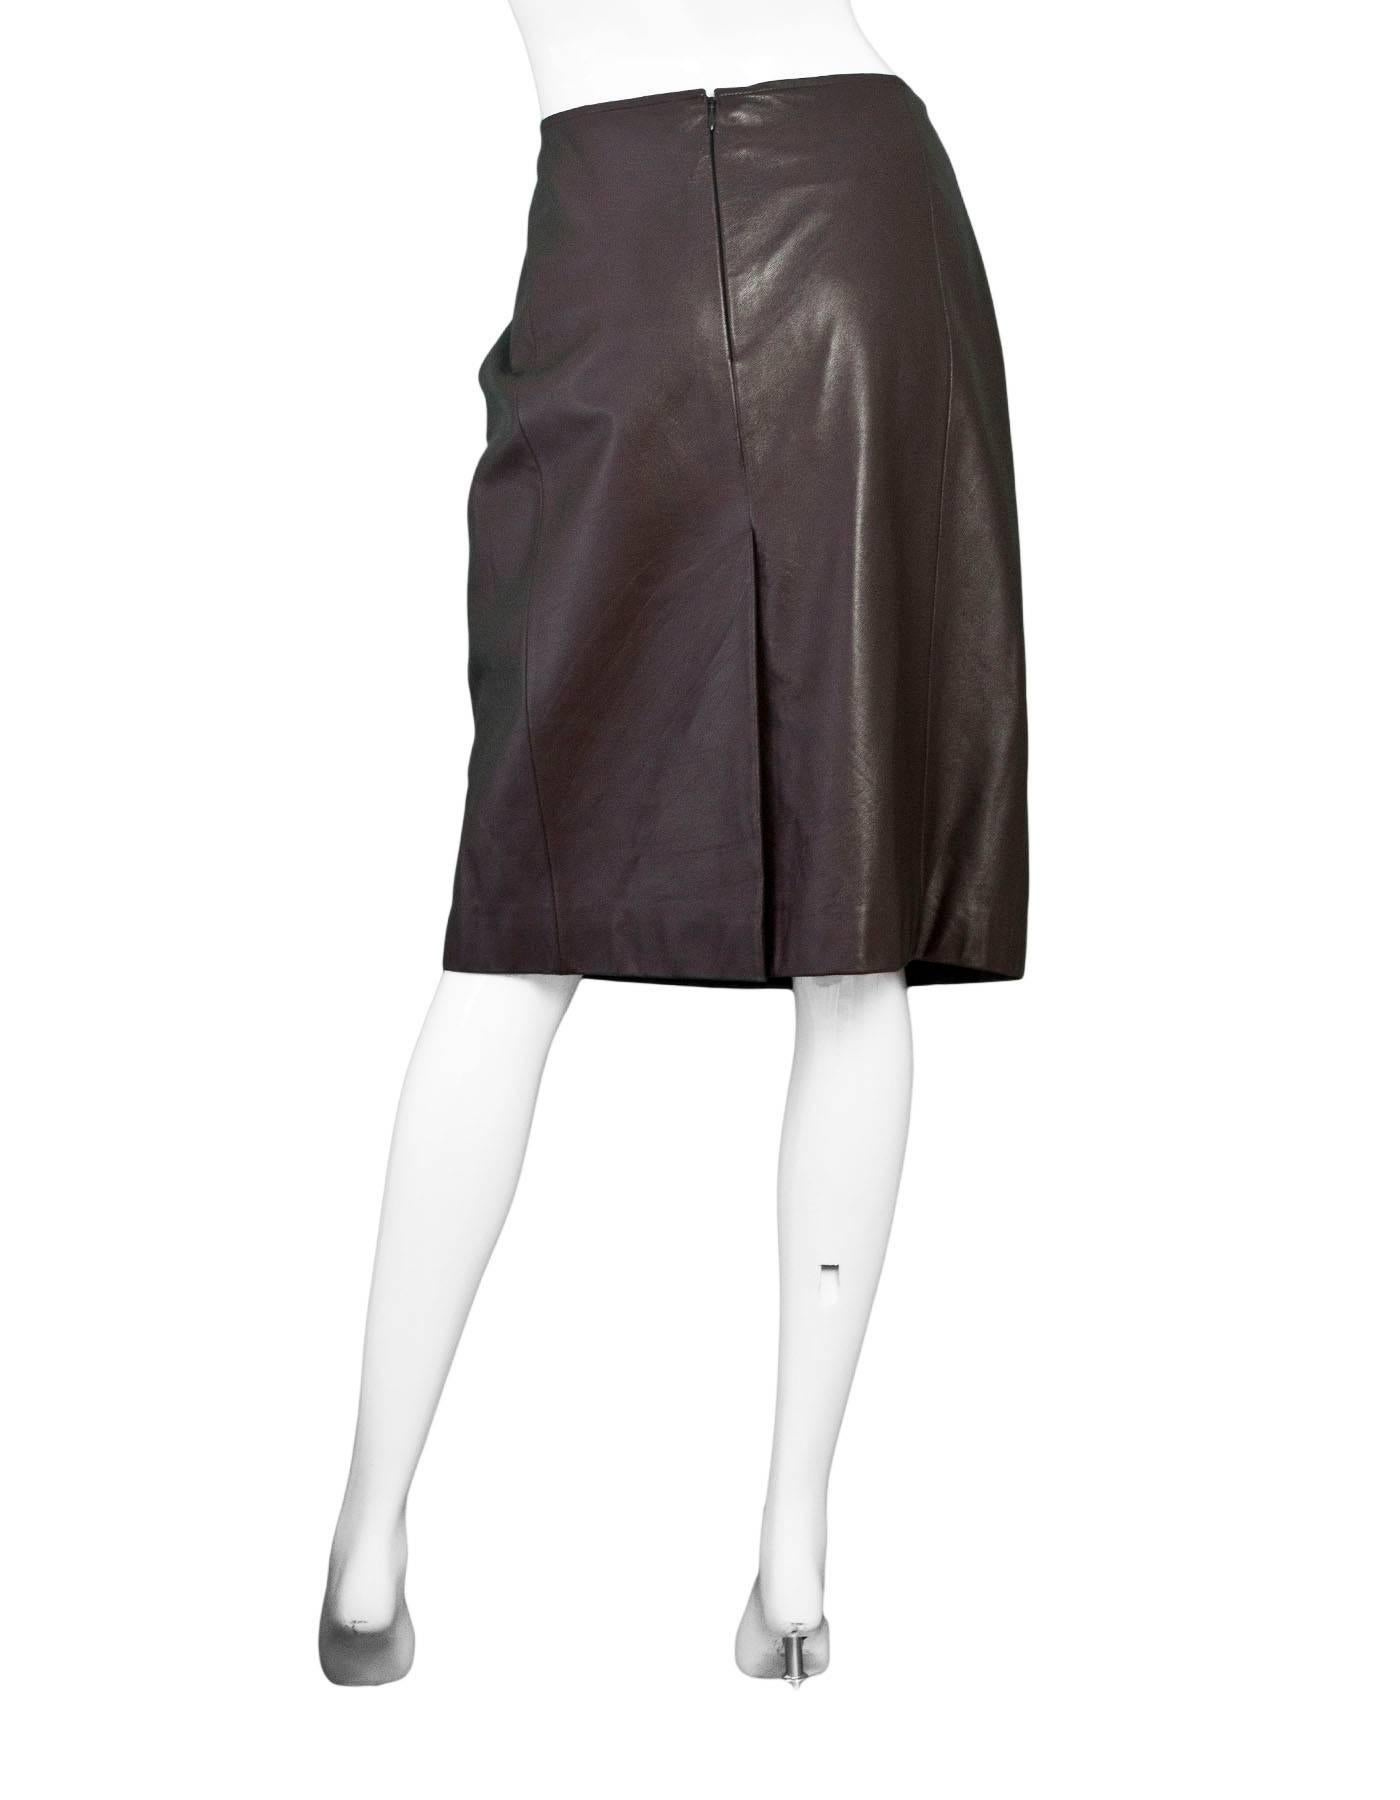 Akris Brown Leather Pencil Skirt 

Made In: Italy
Color: Brown
Composition: 100% leather
Lining: Brown, 100% viscose
Closure/Opening: Back zip up
Exterior Pockets: None
Interior Pockets: None
Overall Condition: Excellent pre-owned condition

Marked